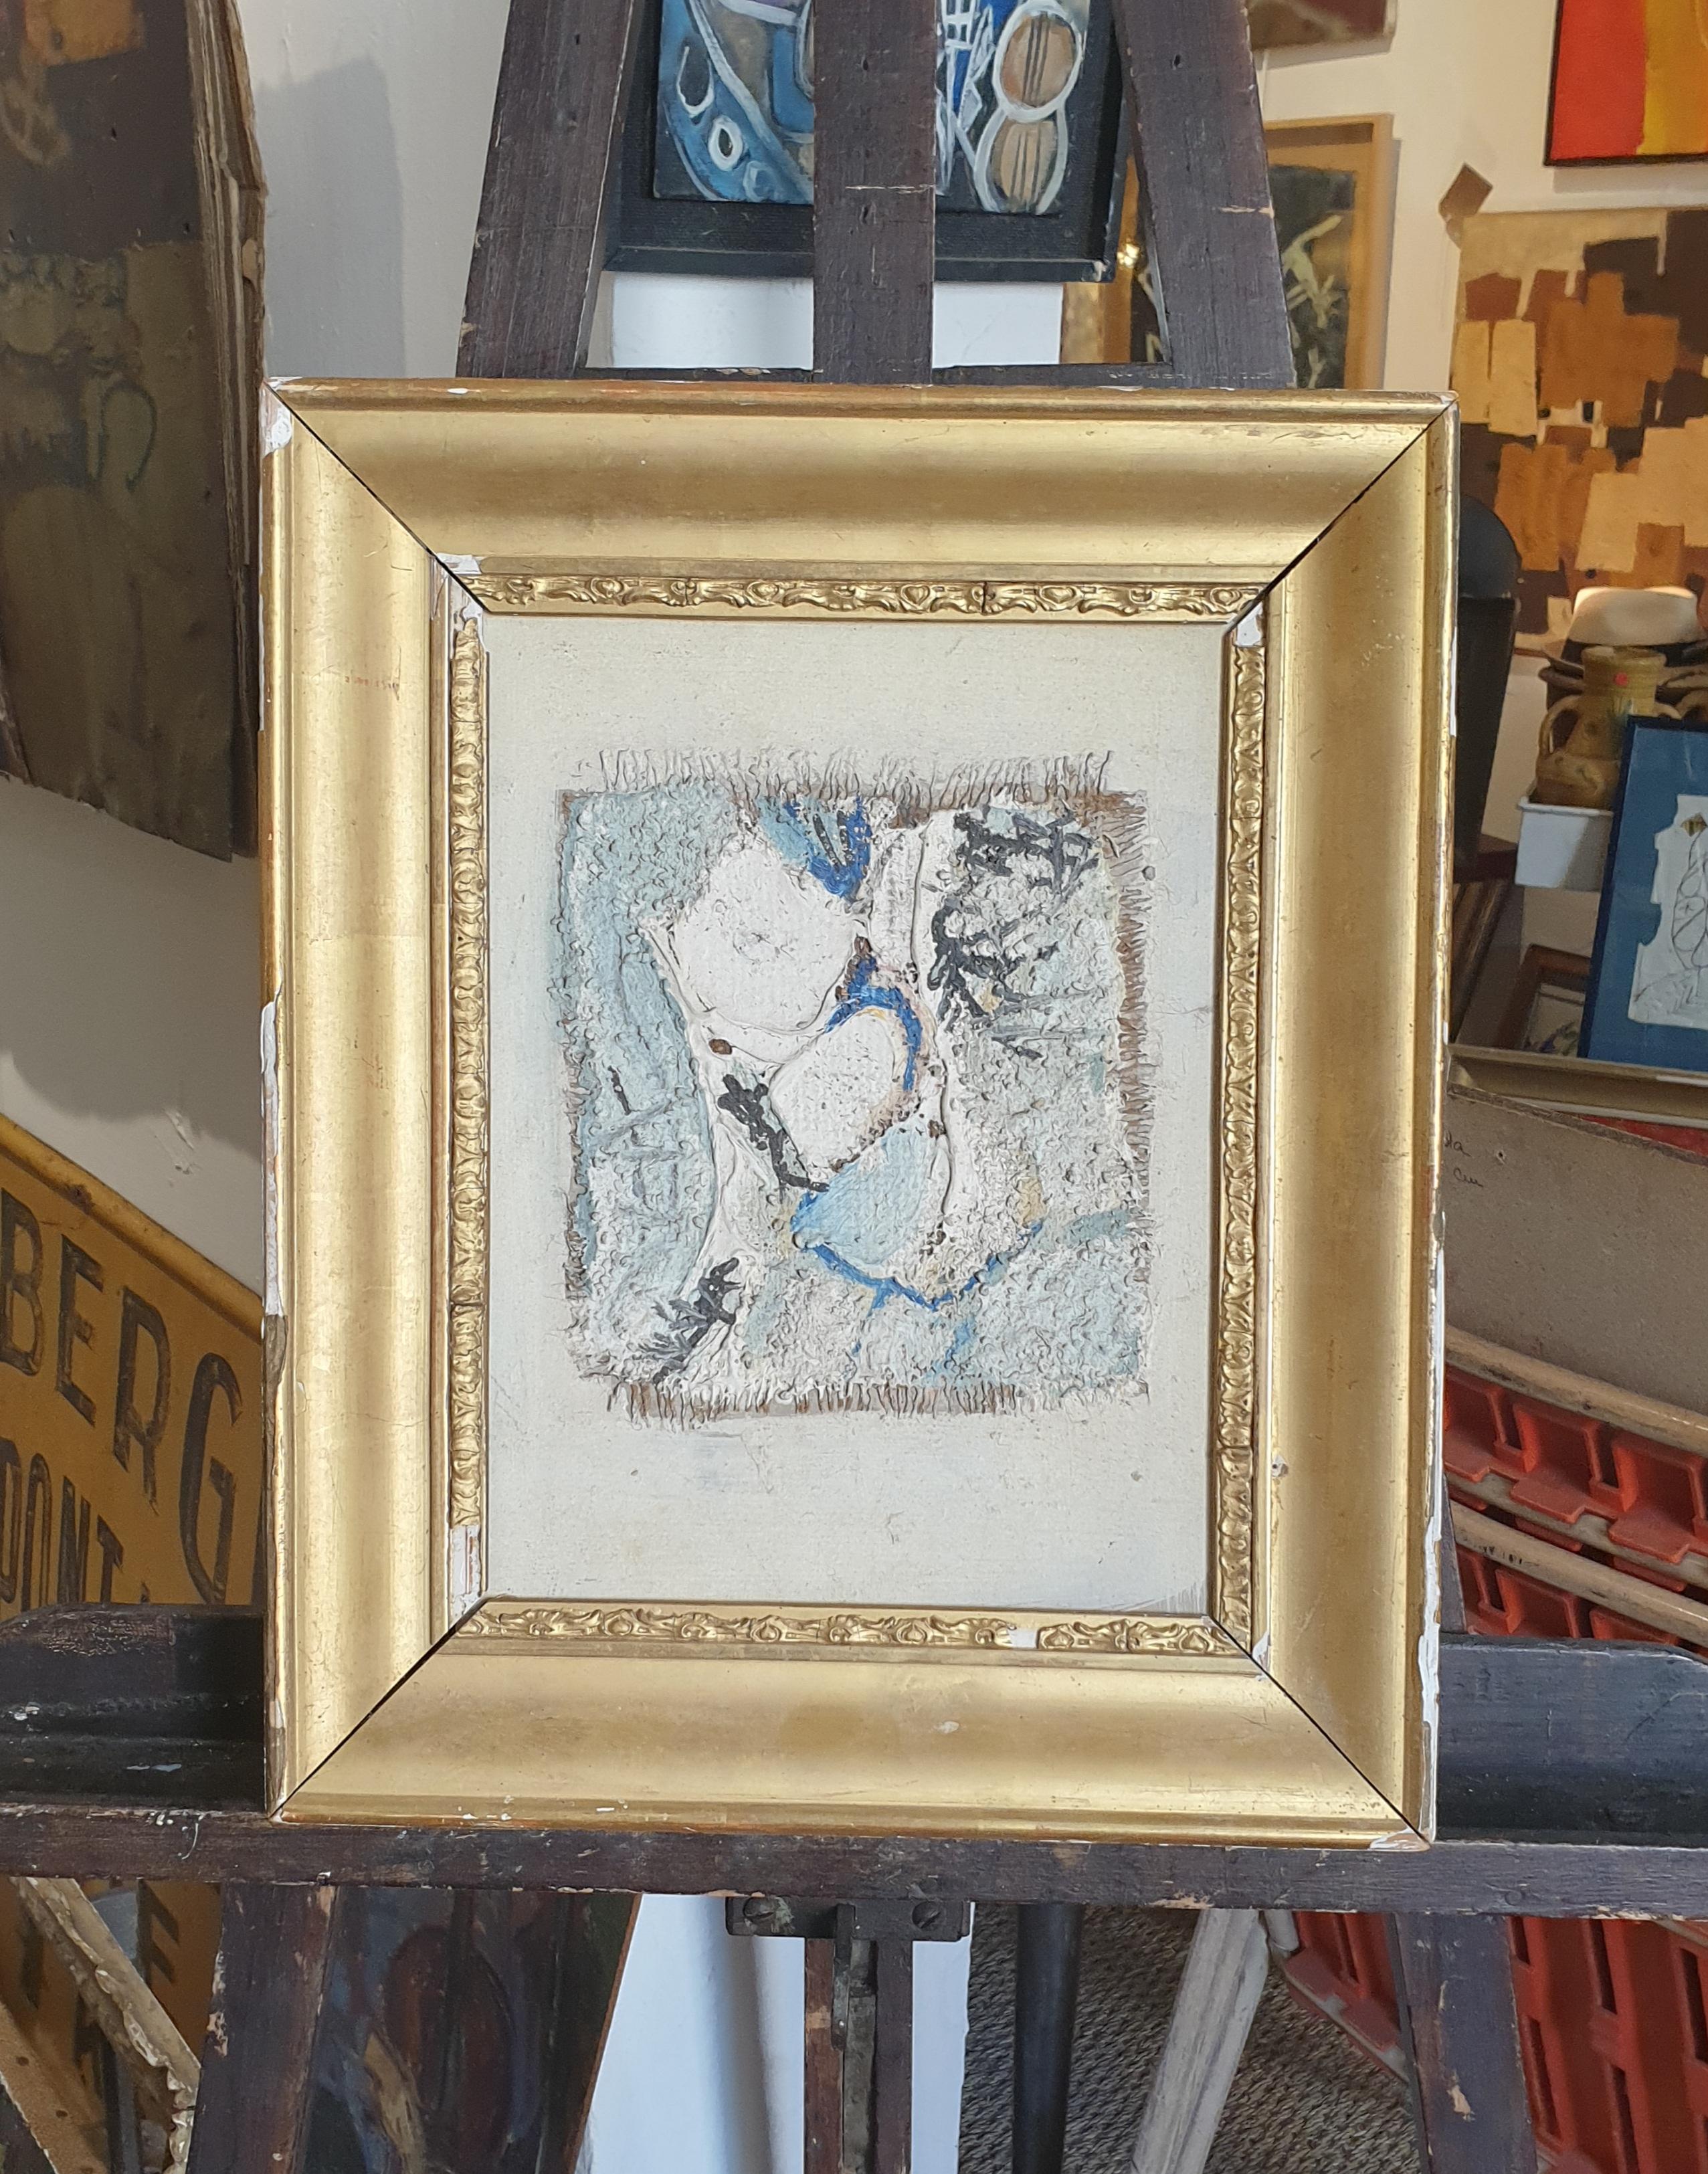 Mixed media abstract expressionist work on board, presented in a gilt wood frame. Artist unknown. 

Acrylic paint in blue, white and black has been thickly applied to a weave of organic material to create this jewel of a painting. The texture of the